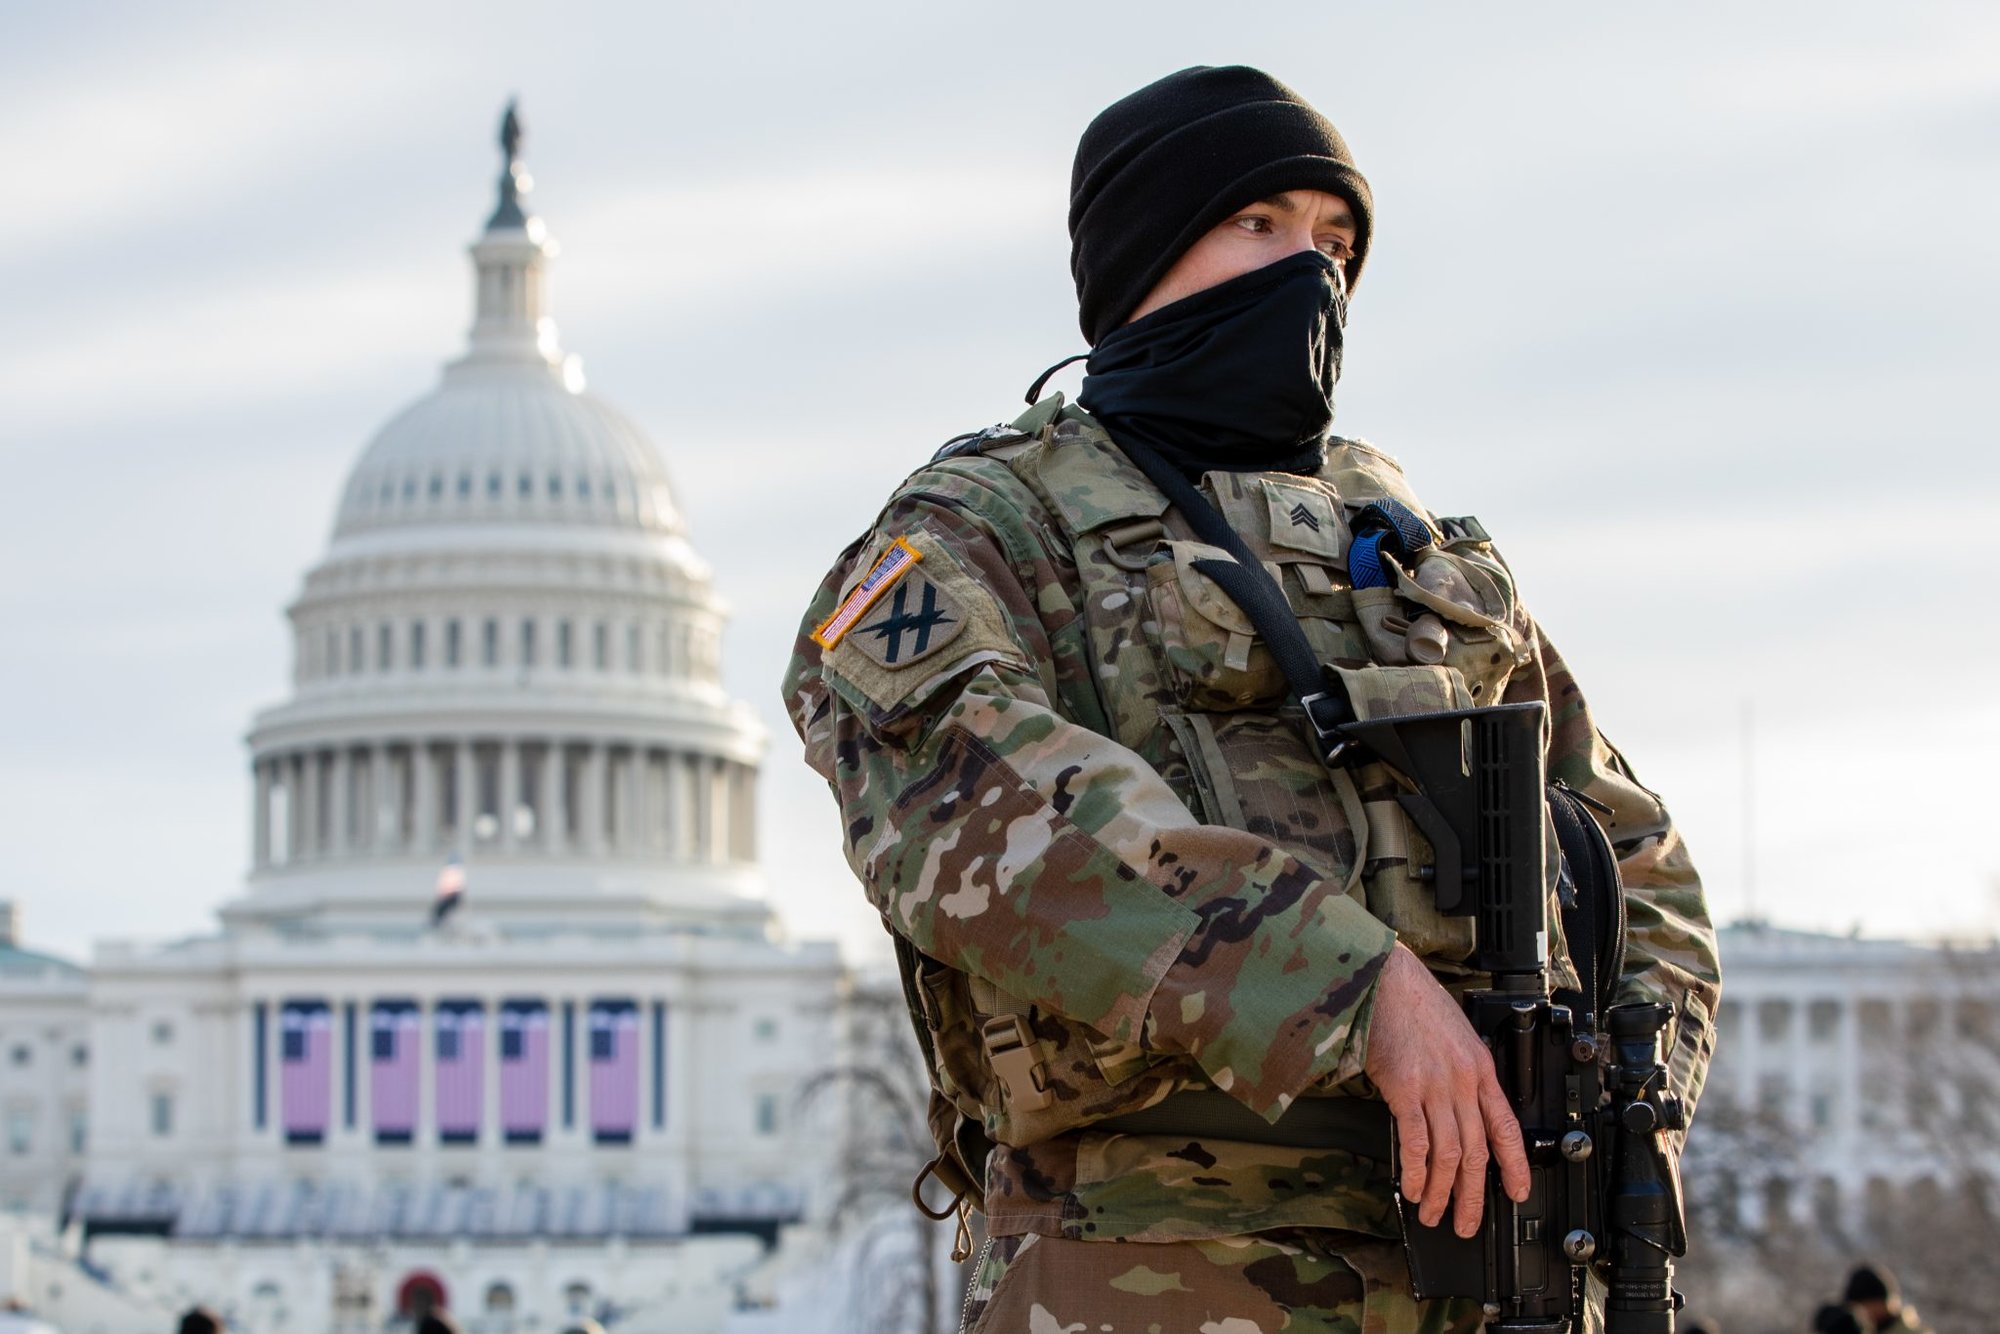 Georgia Army National Guardsmen from various units of the Macon-based 48th Infantry Brigade Combat Team take up security positions to assist the U.S. Capitol Police Department prior to the Presidential Inauguration in Washington D.C., Jan 19, 2021. US Army National Guard photo by Sgt. 1st Class R.J. Lannom Jr.
U.S. Army National Guard photo by Sgt. 1st Class R.J. Lannom Jr.